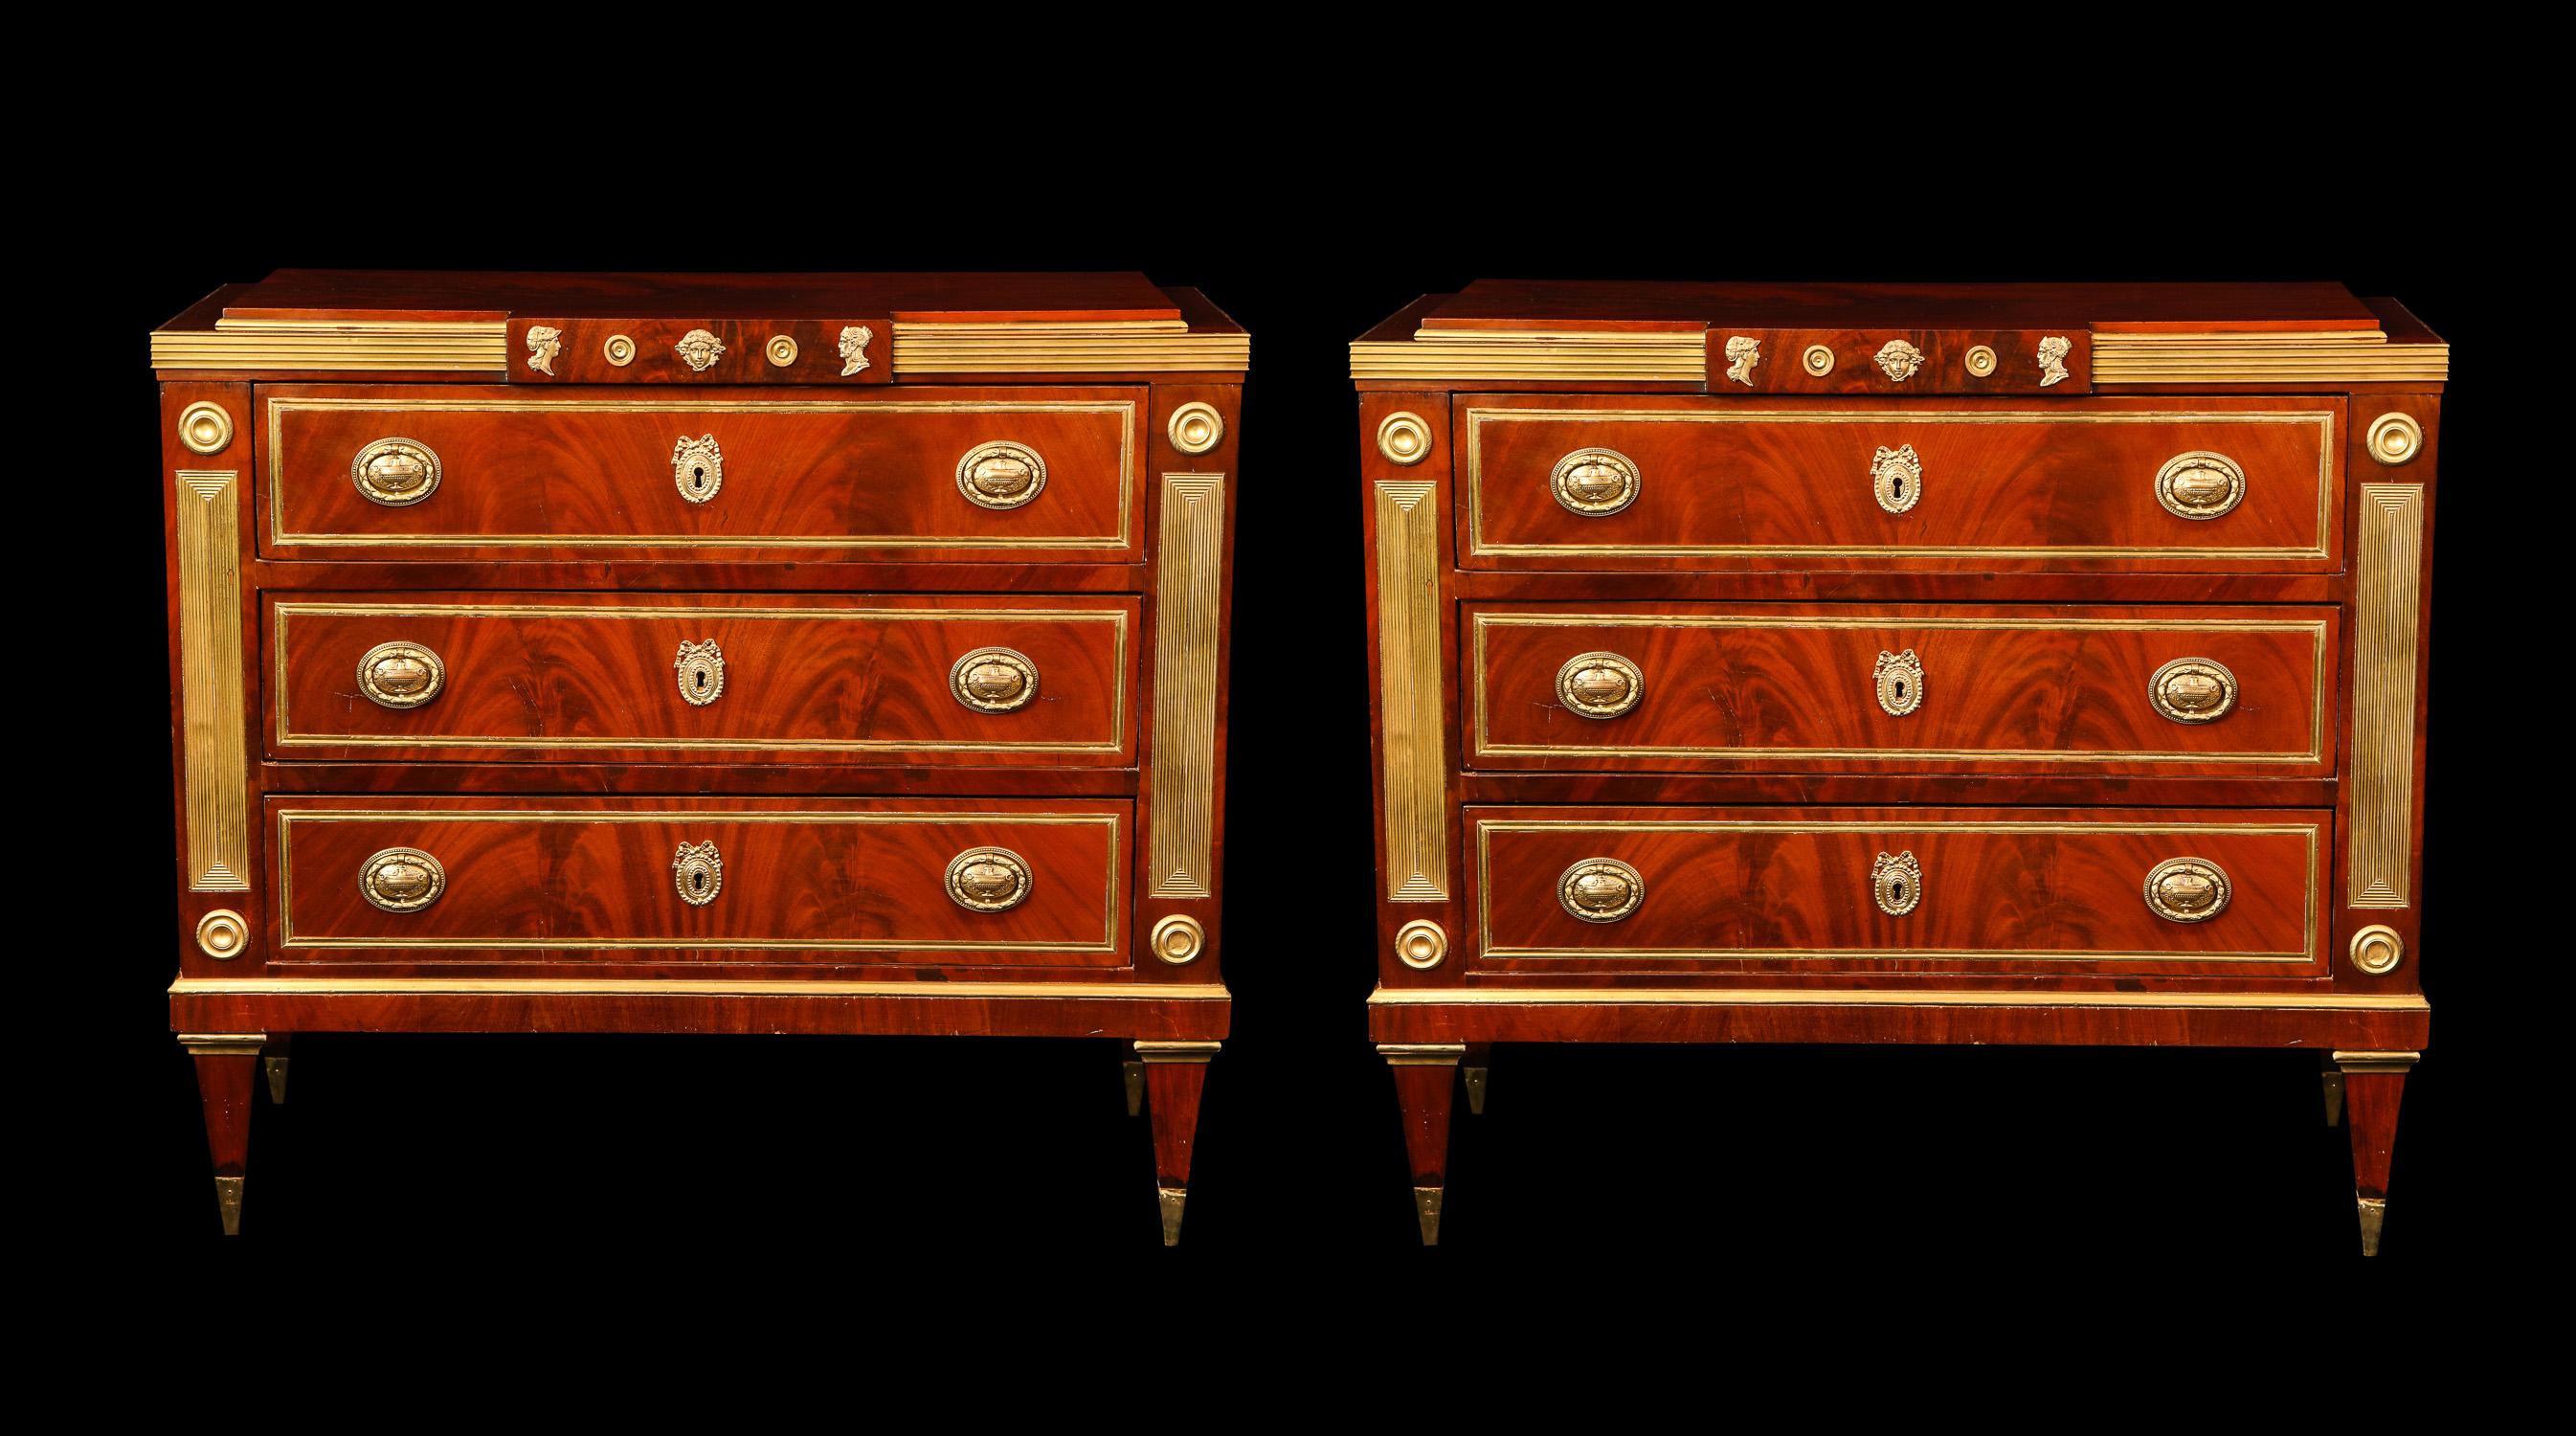 A pair of fine antique Russian neoclassical gilt bronze-mounted three-drawer mahogany commodes of superb detail embellished with neoclassical gilt bronze mounts.